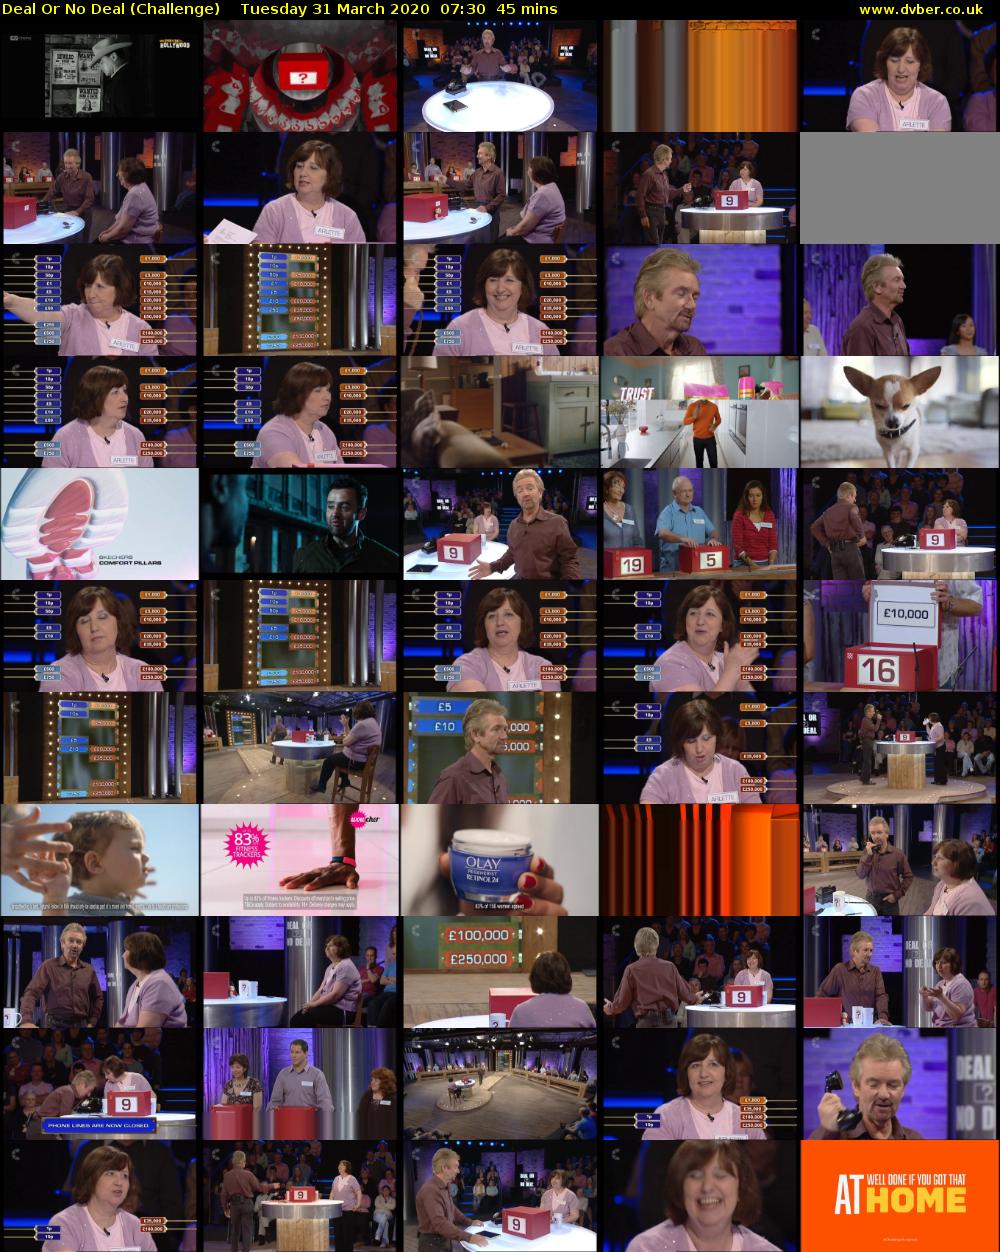 Deal Or No Deal (Challenge) Tuesday 31 March 2020 07:30 - 08:15